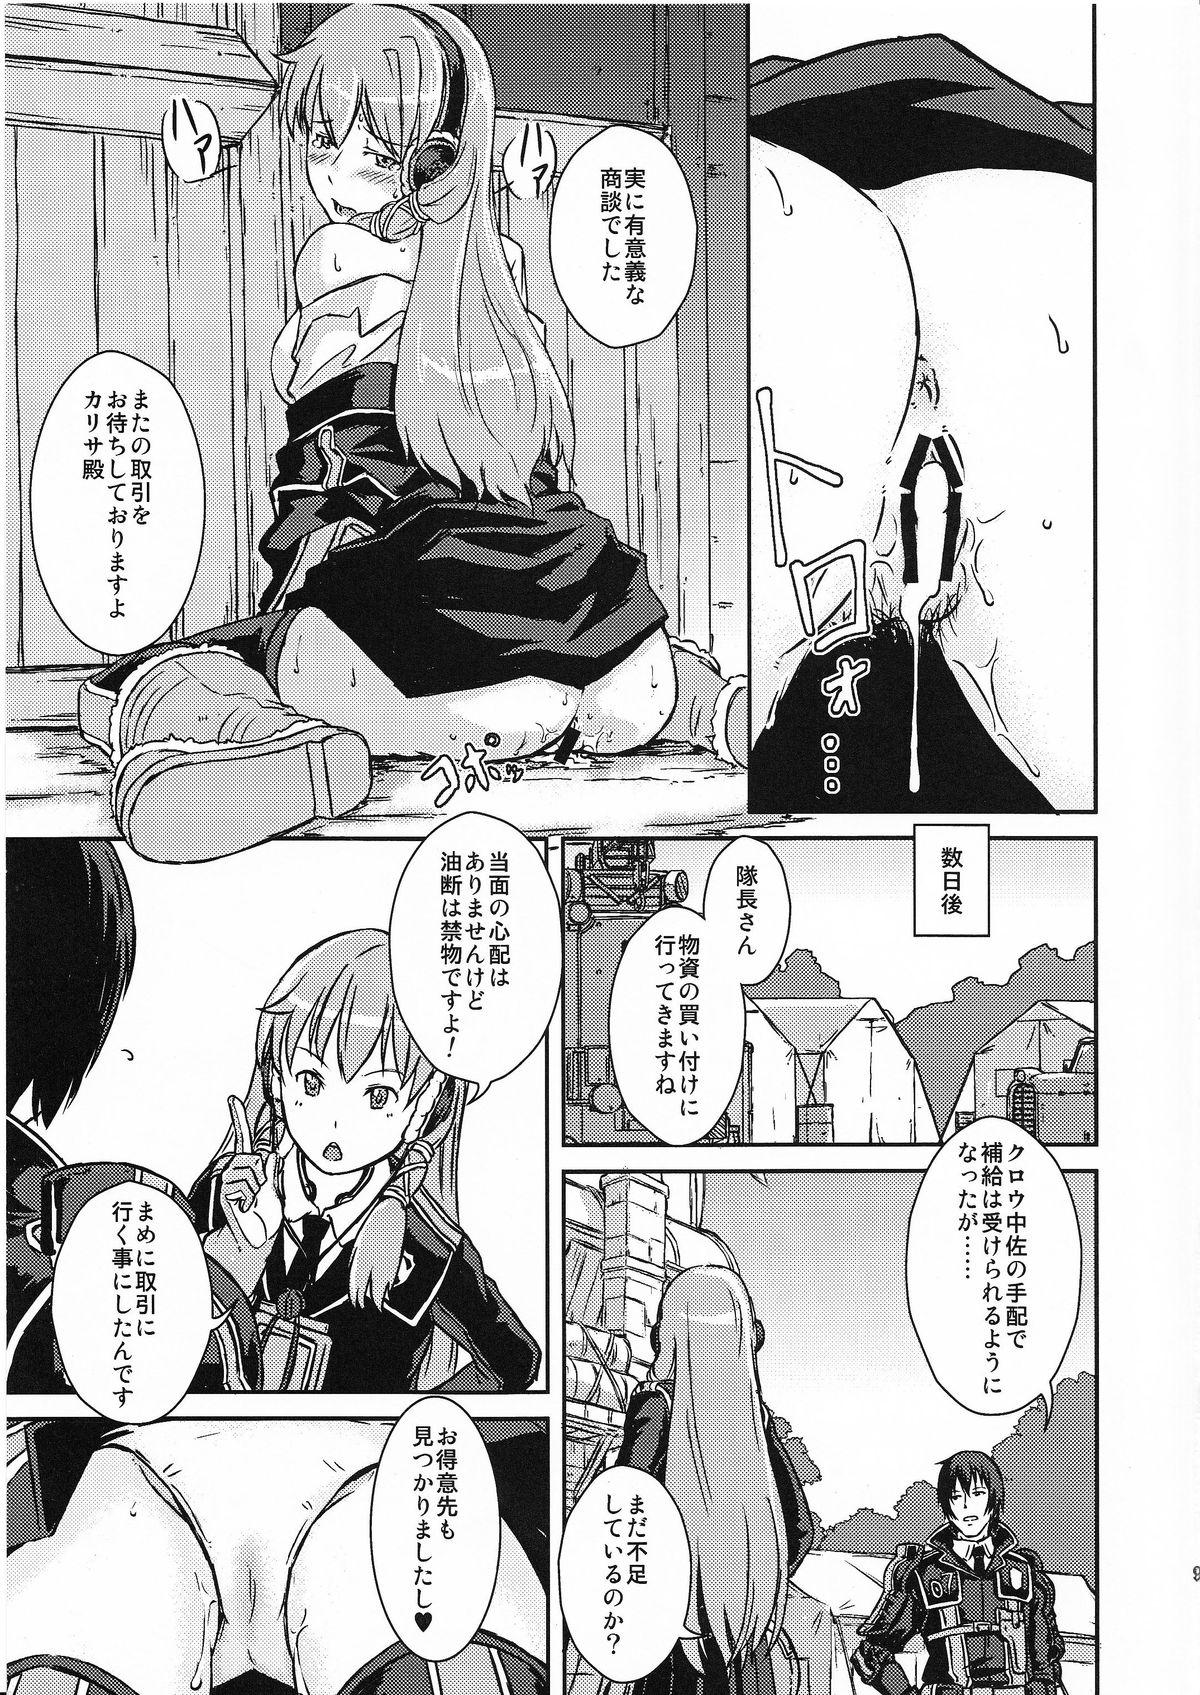 Man Military Life of Squard 422 NO.2 - Valkyria chronicles Valkyria chronicles 3 Love Making - Page 8